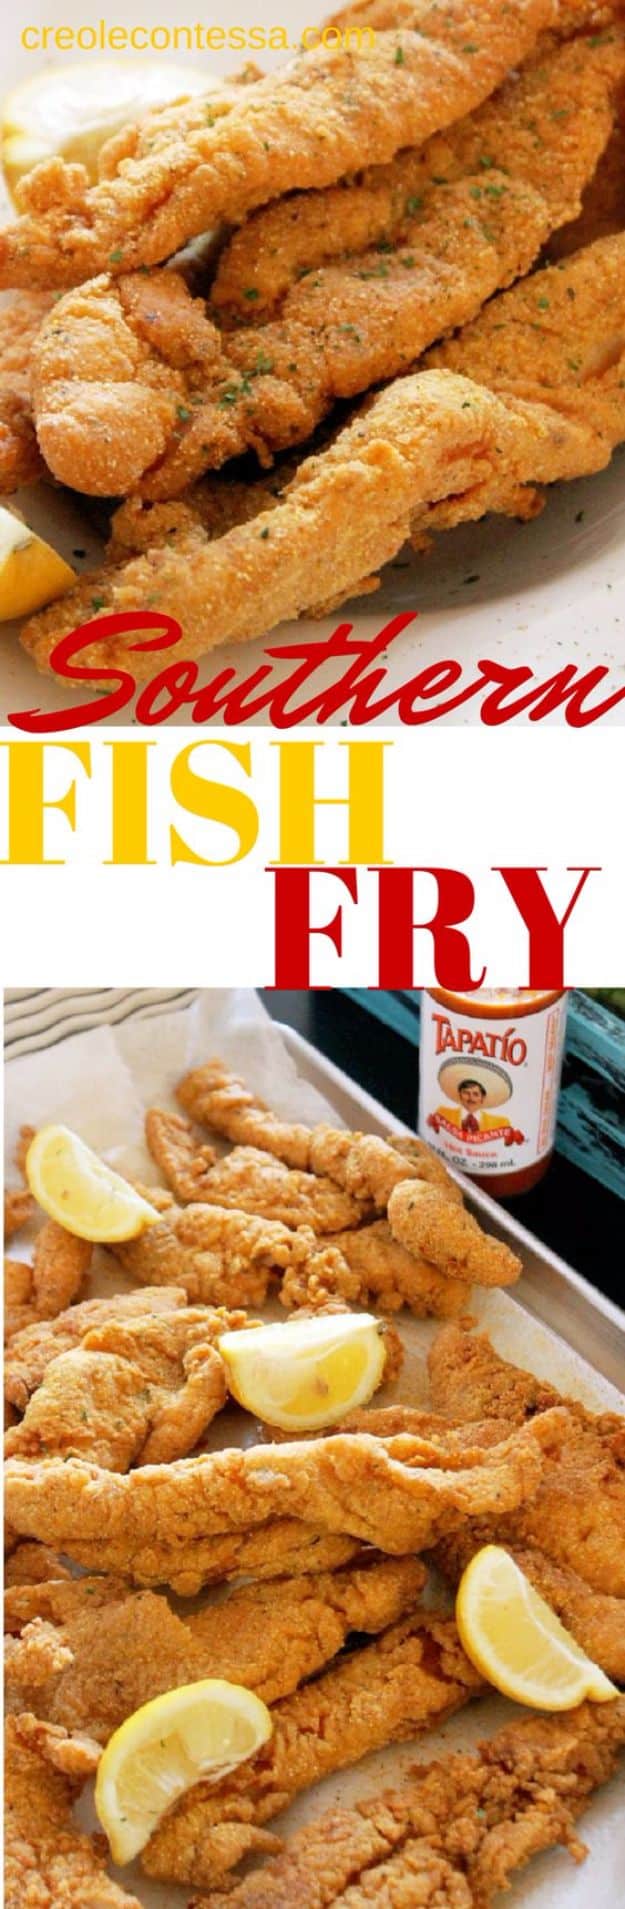 Best Country Cooking Recipes - Southern Fish Fry - Easy Recipes for Country Food Like Chicken Fried Steak, Fried Green Tomatoes, Southern Gravy, Breads and Biscuits, Casseroles and More - Breakfast, Lunch and Dinner Recipe Ideas for Families and Feeding A Crowd - Step by Step Instructions for Making Homestyle Dips, Snacks, Desserts #recipes